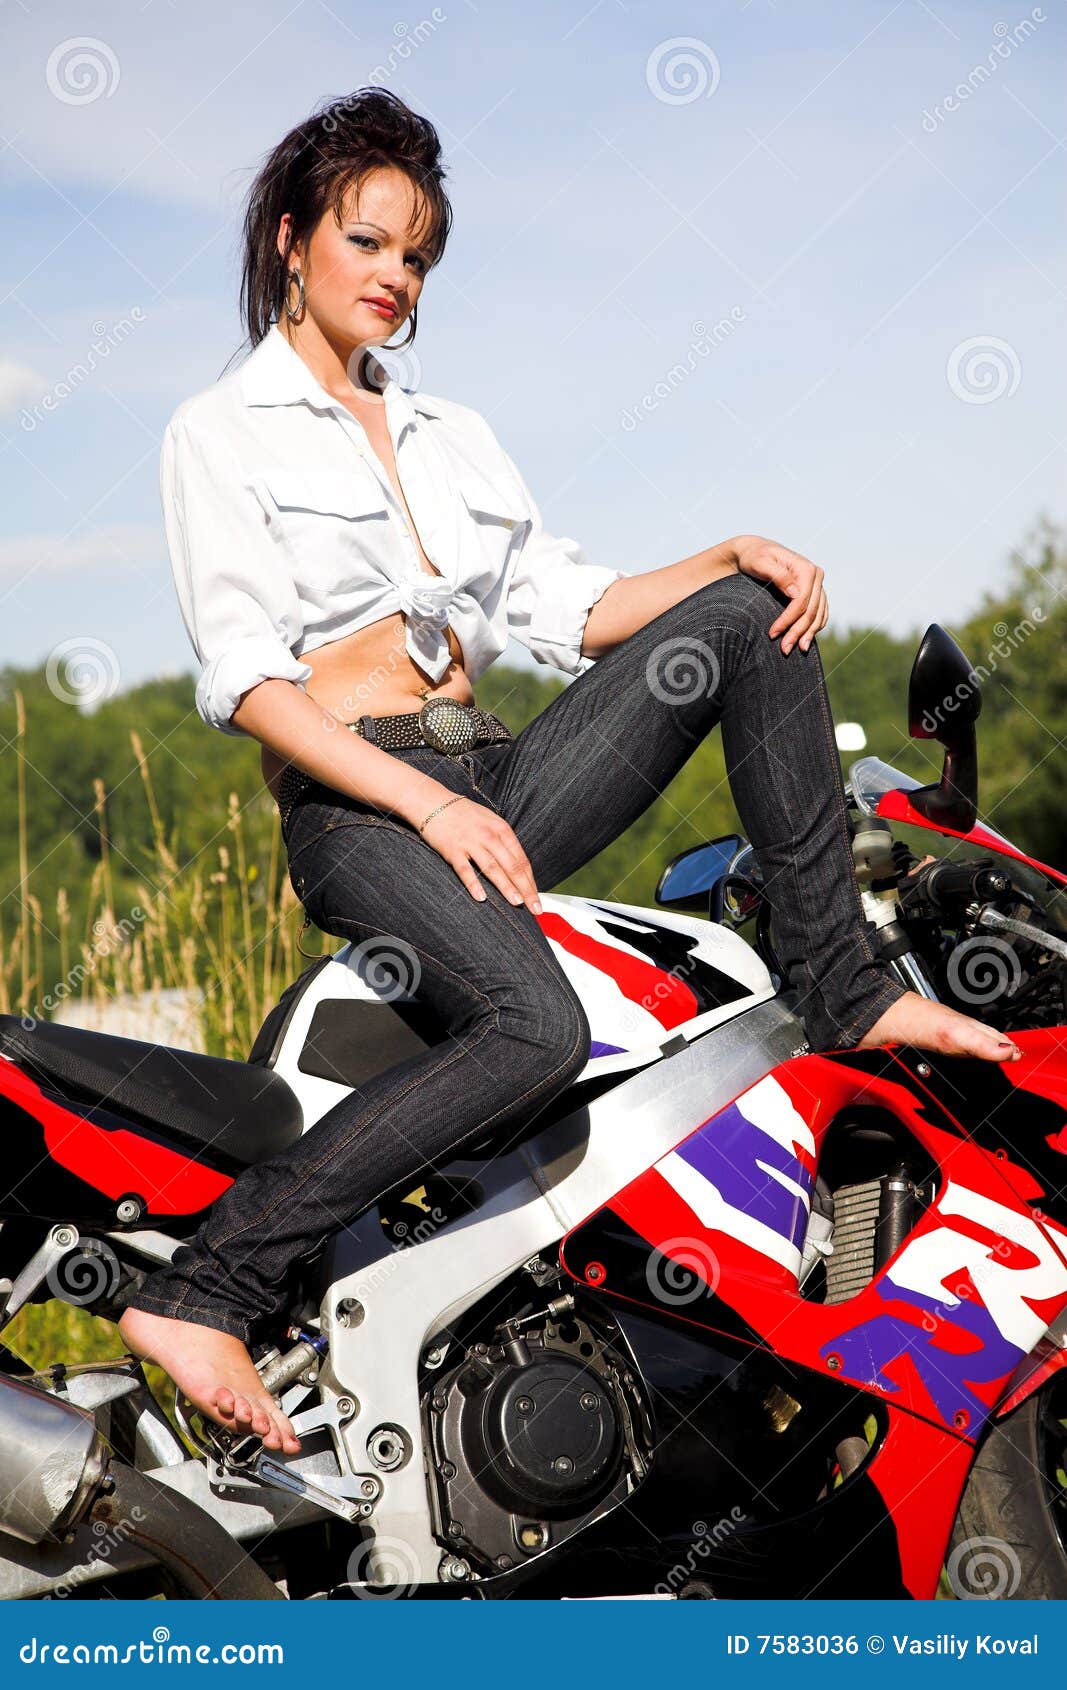 Girl with motorbike stock photo. Image of brunette, hair - 7583036